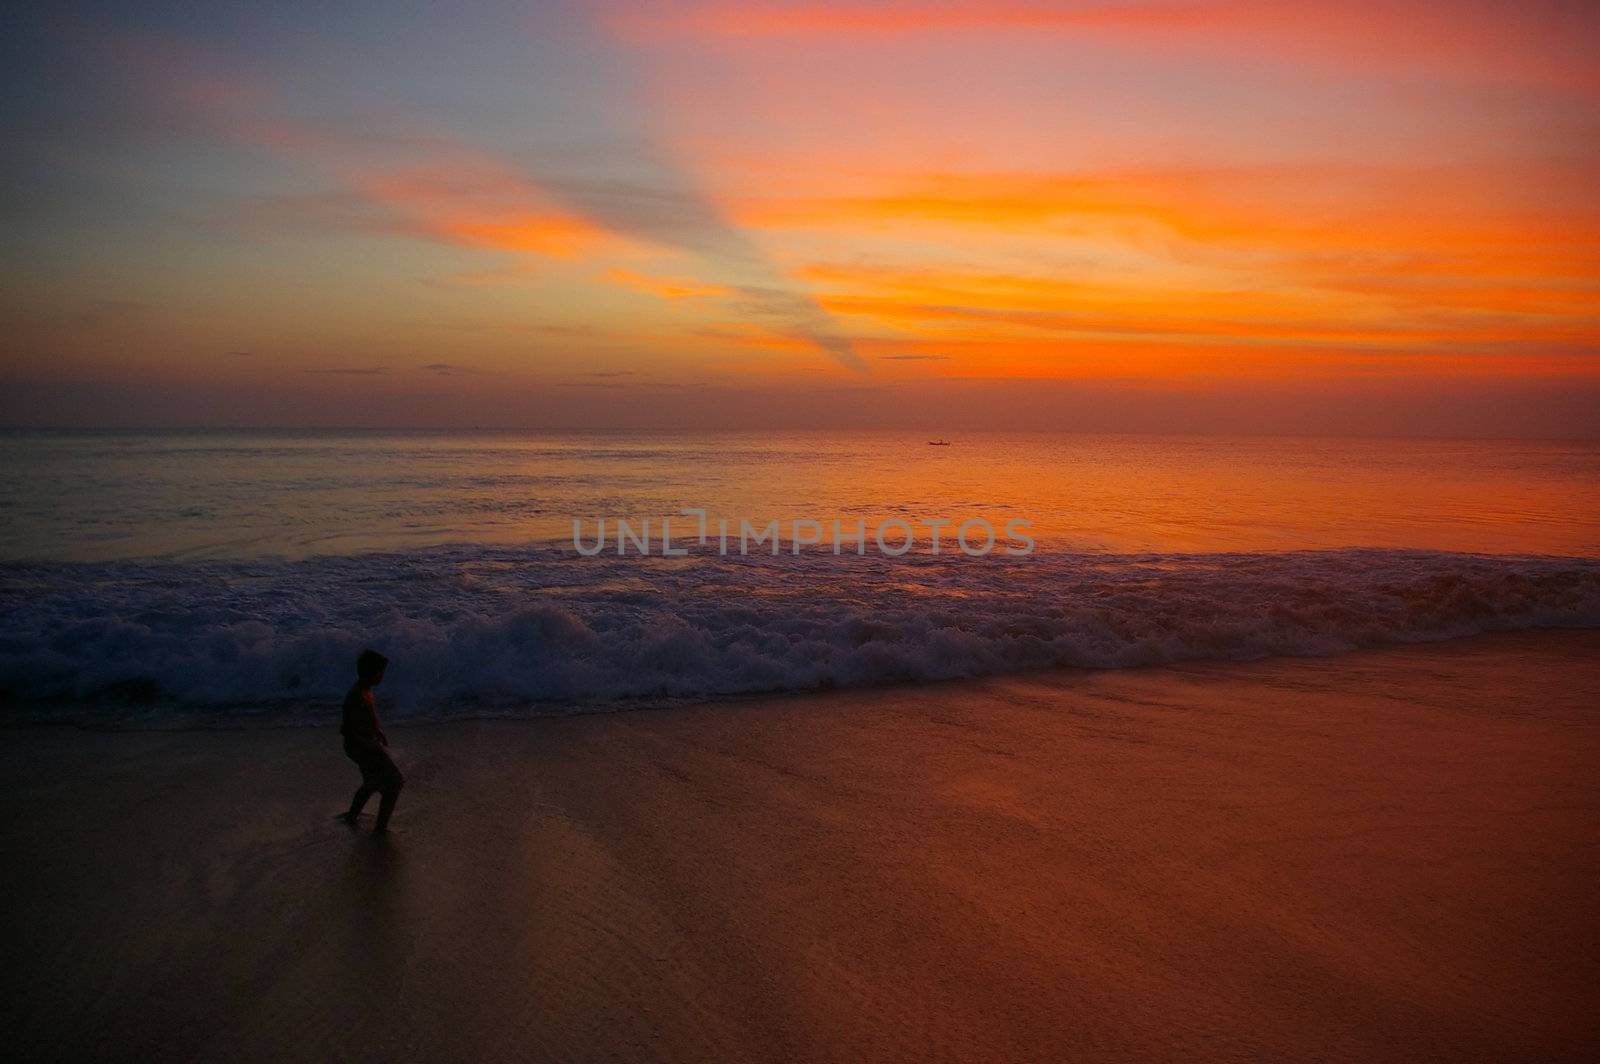 Boy on a beach at sunset with waves rolling towards him. Dreamland beach, Bali, Indonesia.